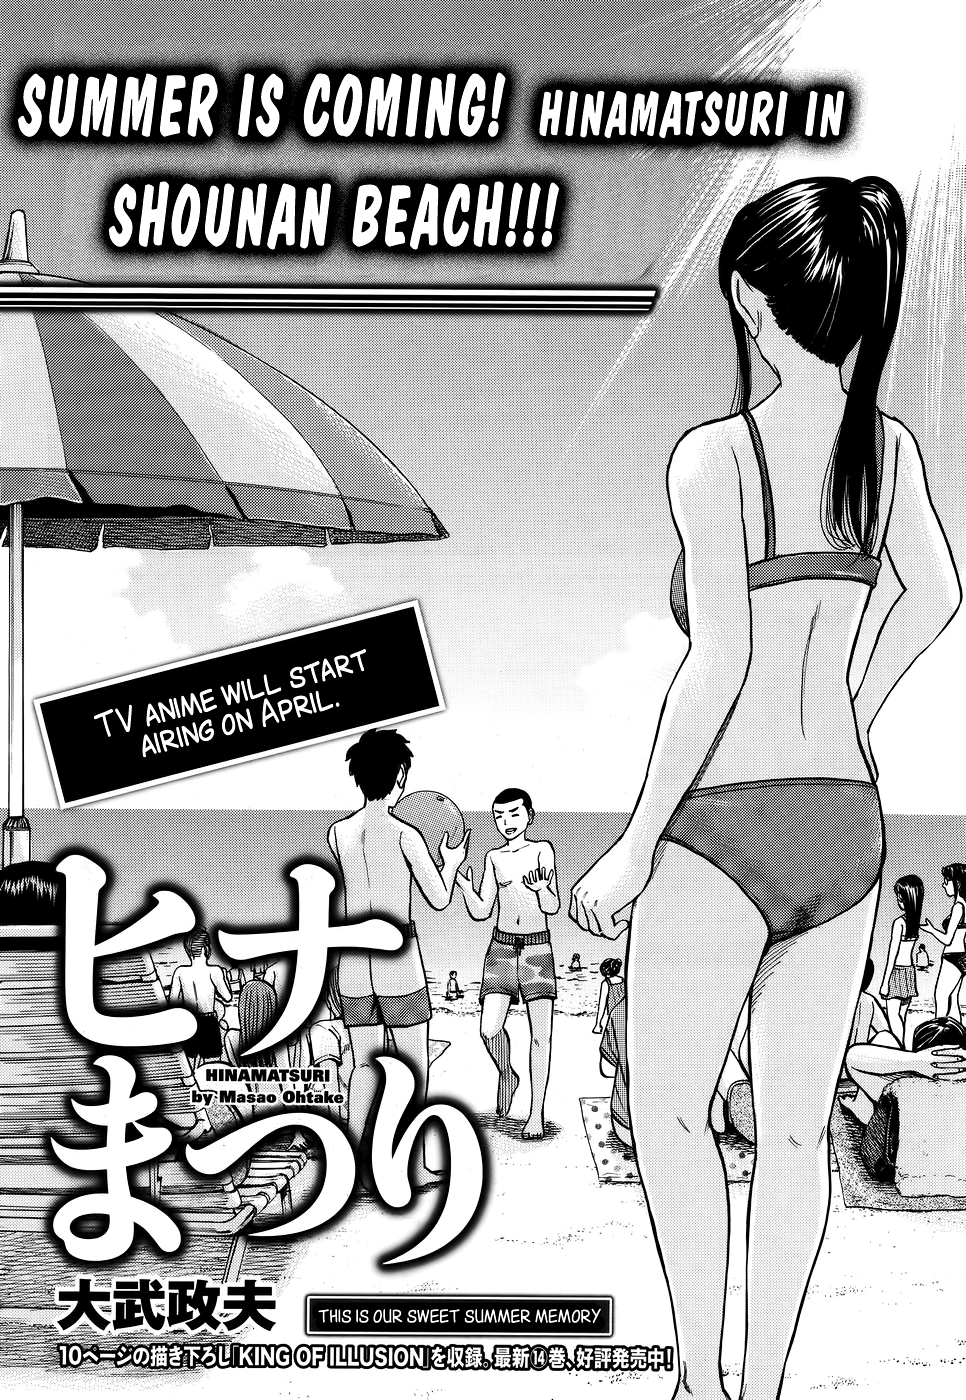 Hinamatsuri Vol.15-Chapter.75-This-is-our-sweet-summer-memory Image